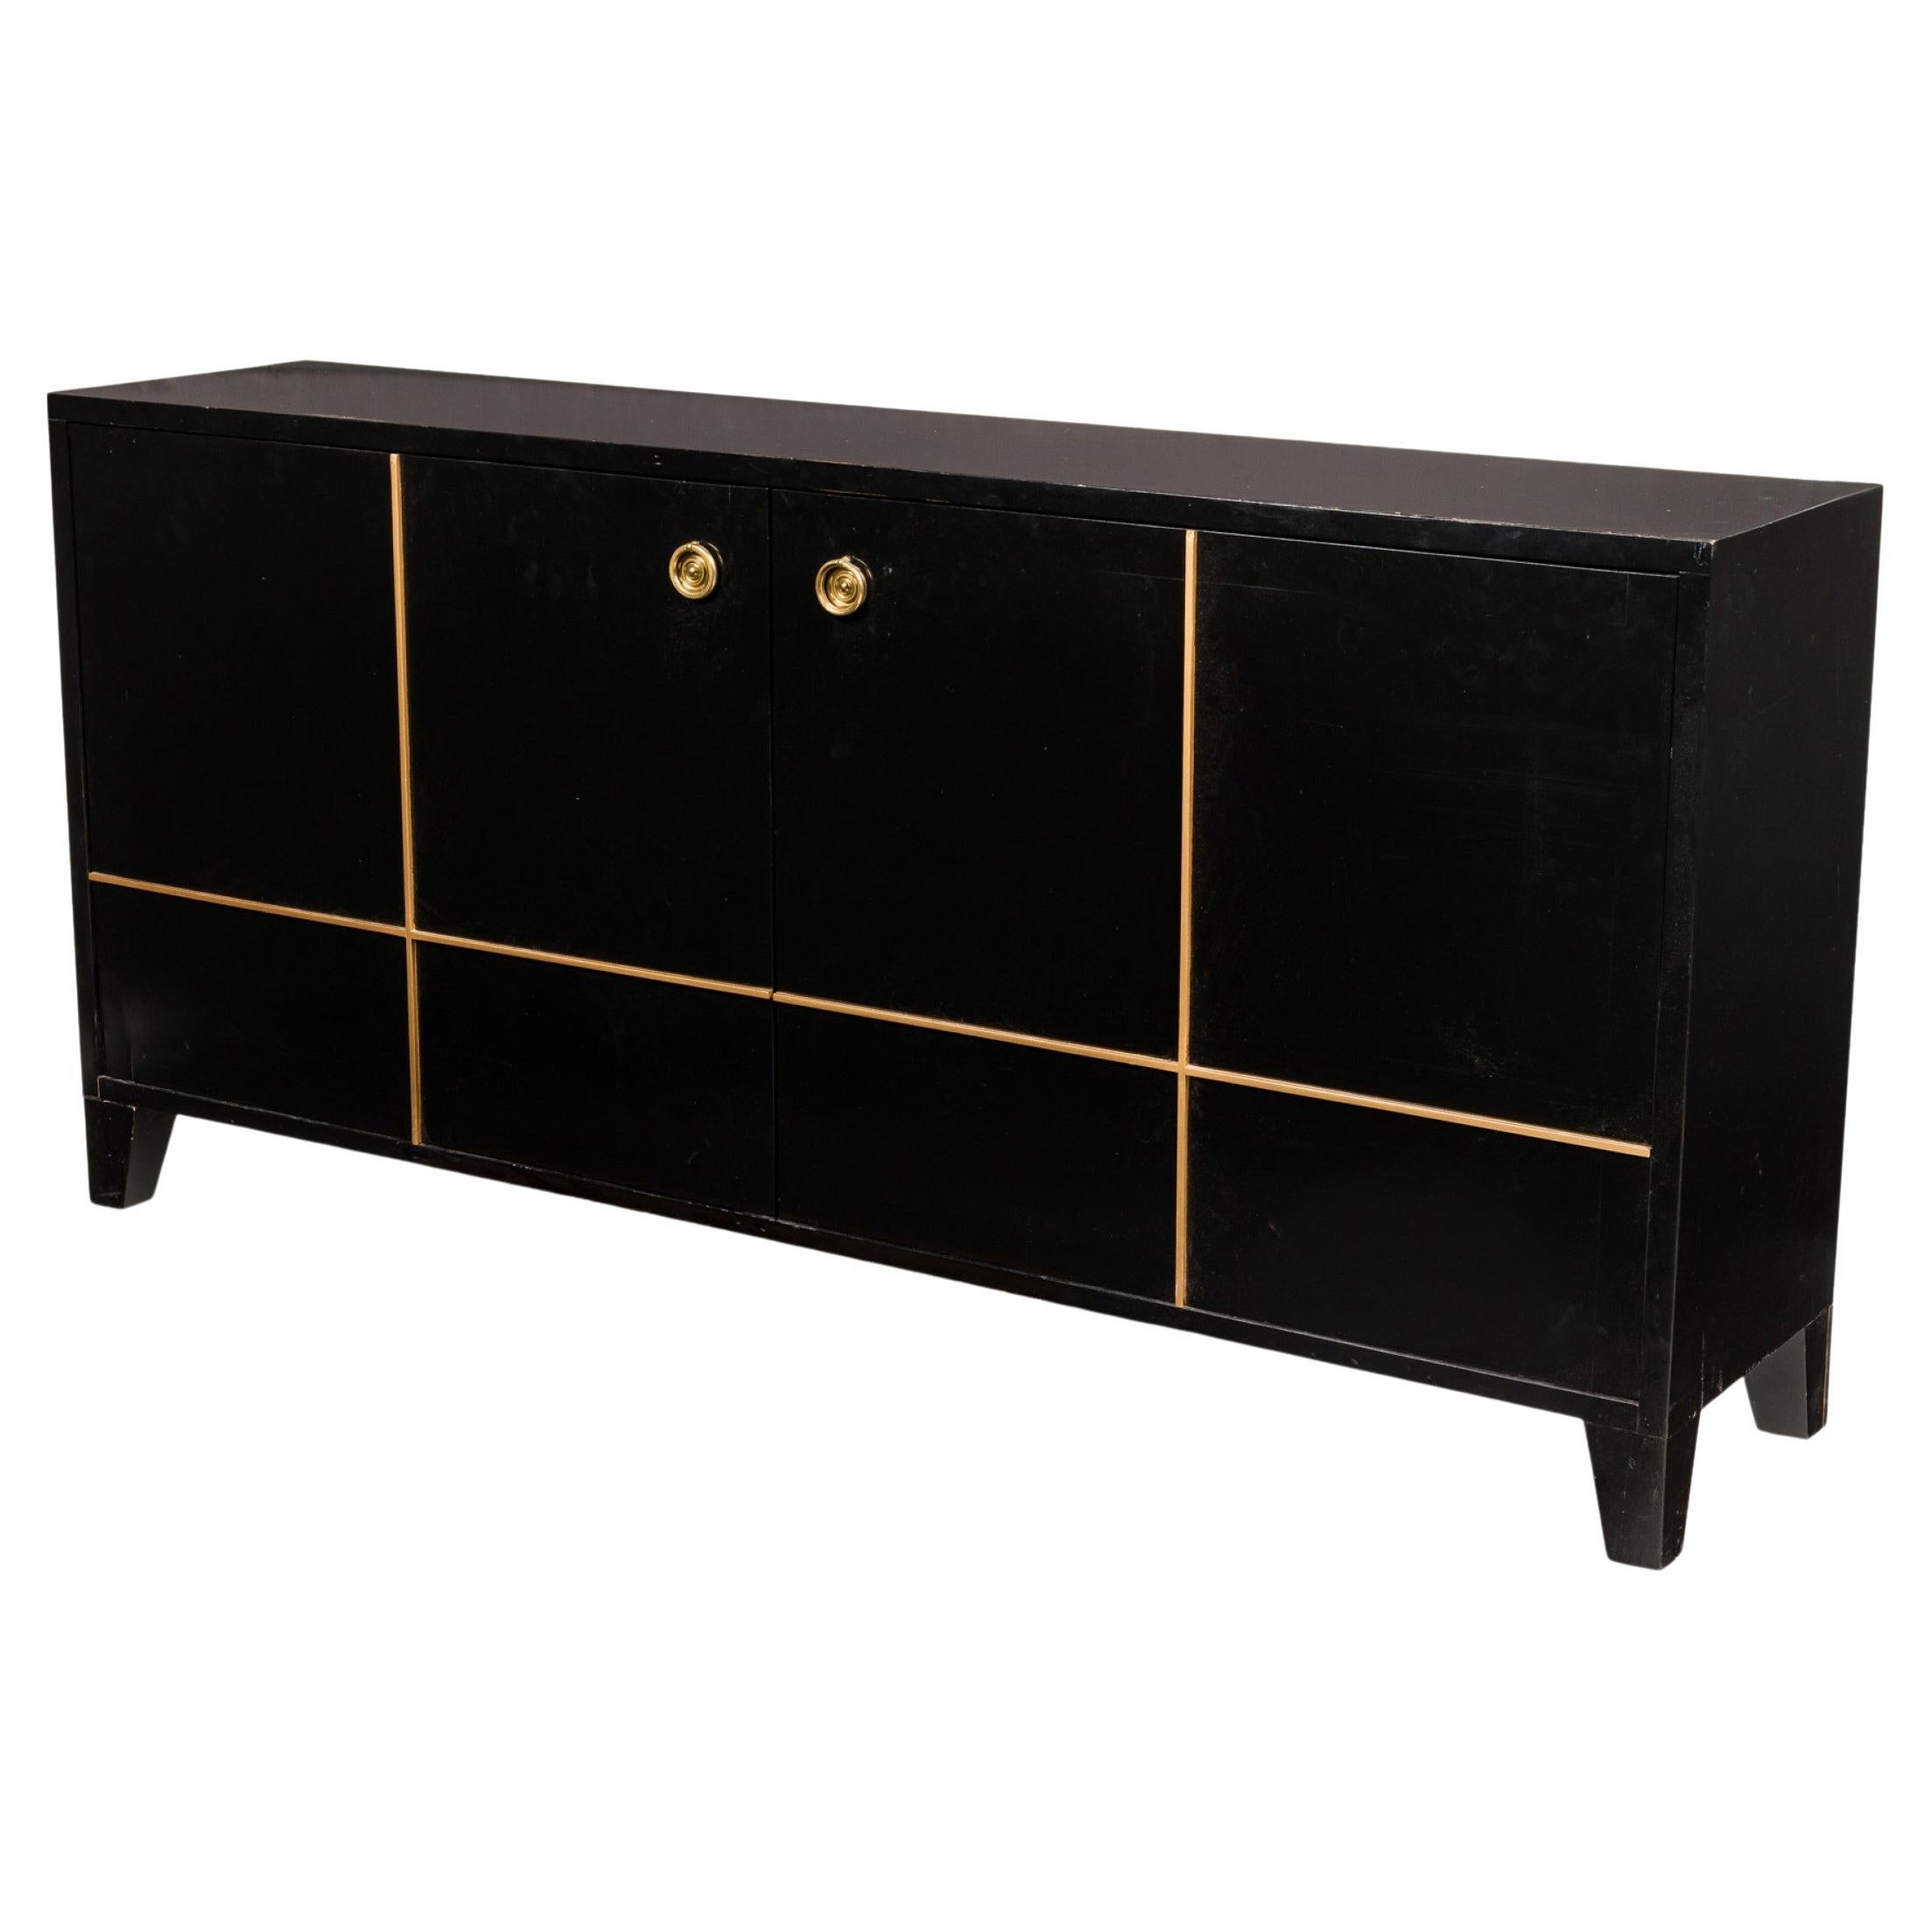 Contemporary Black and Gold Painted Geometric Design Console Cabinet Sideboard For Sale